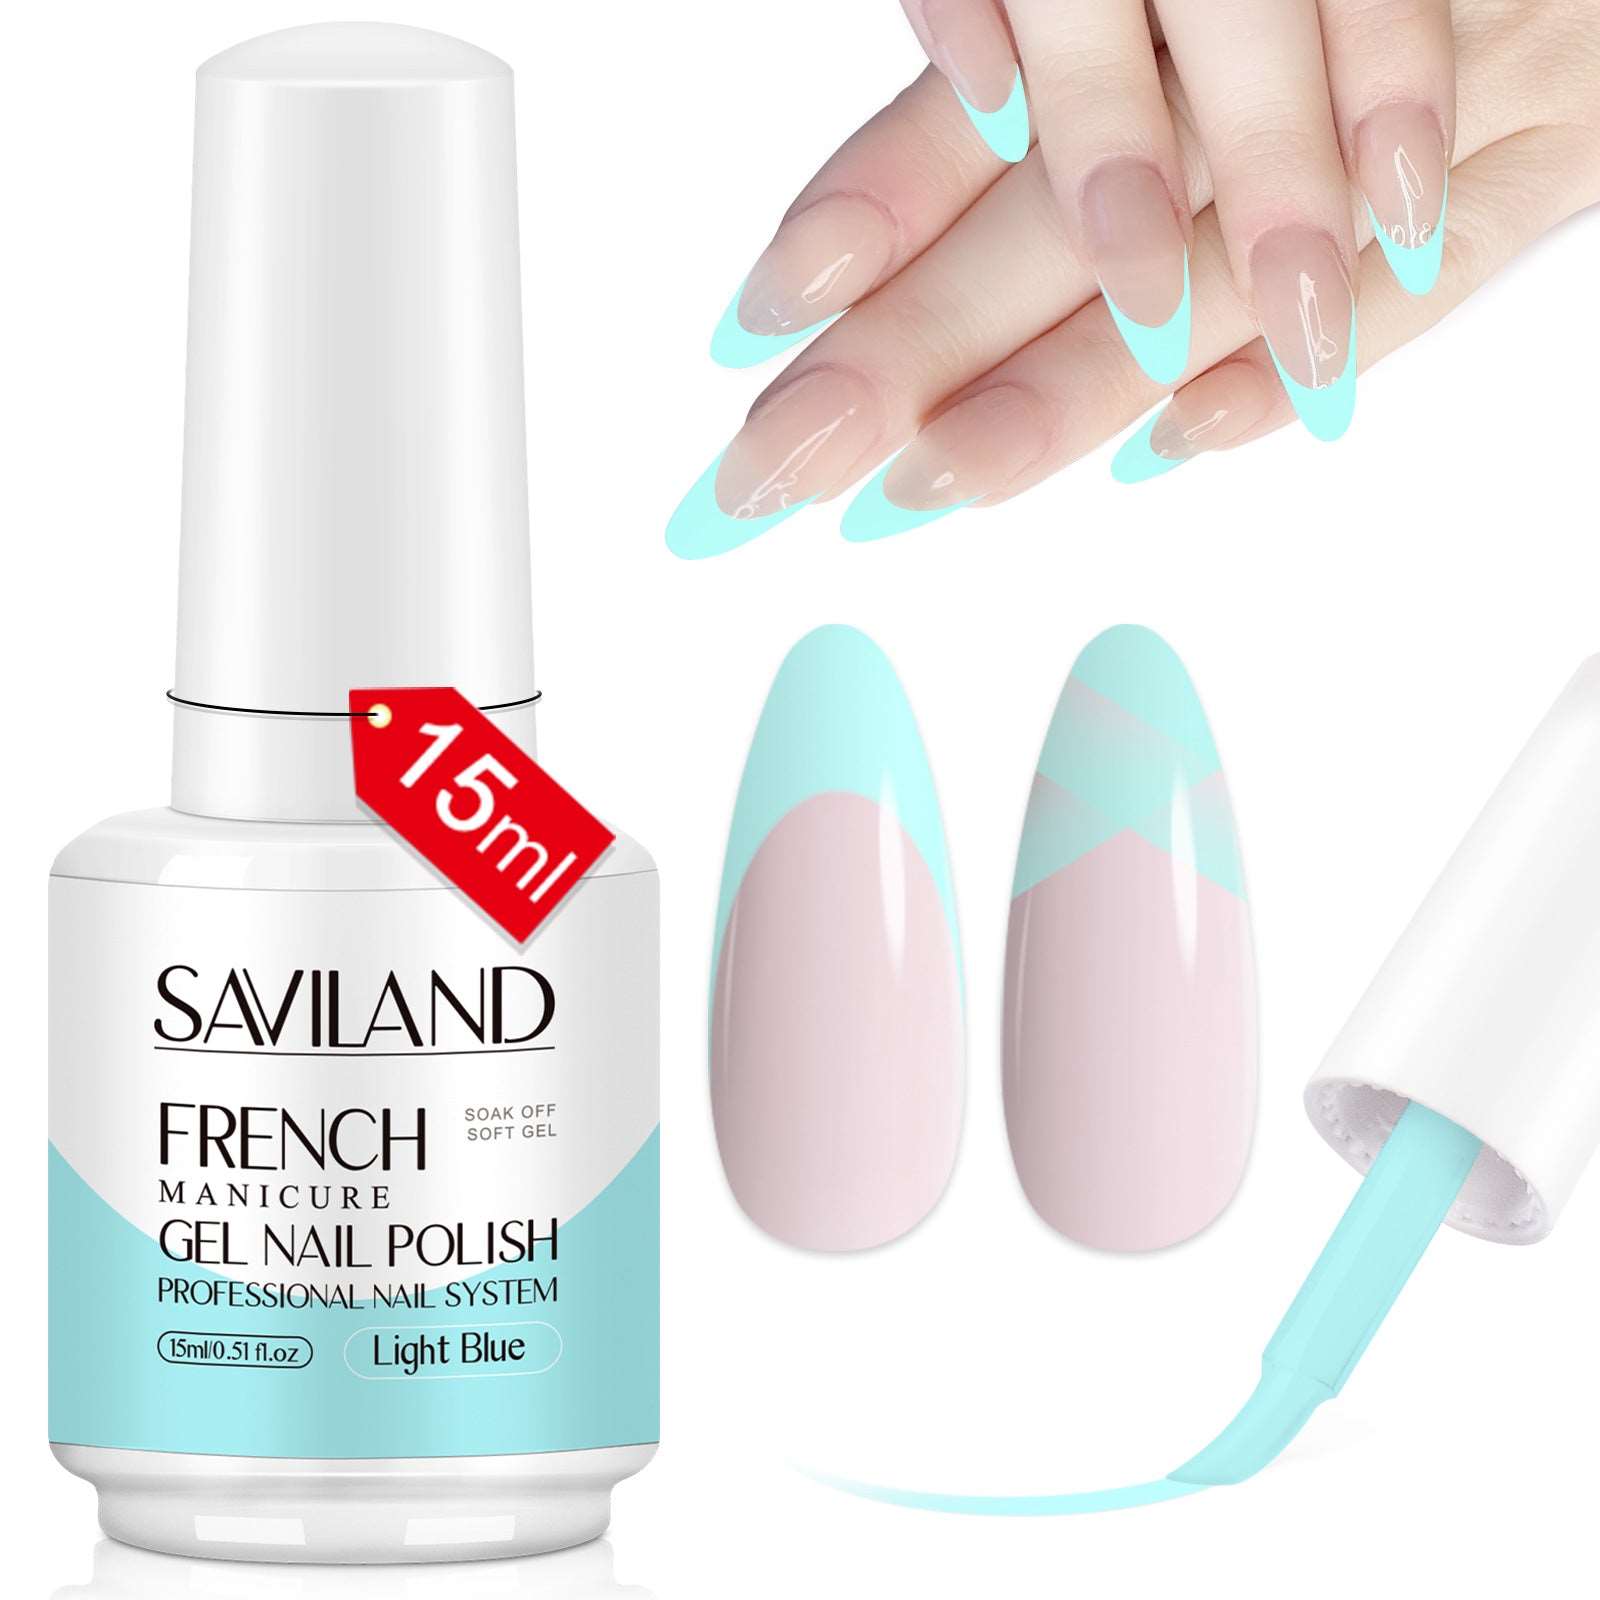 [US ONLY]15ML French Gel Nail Polish - 1PC Spring Summer Light Blue Color